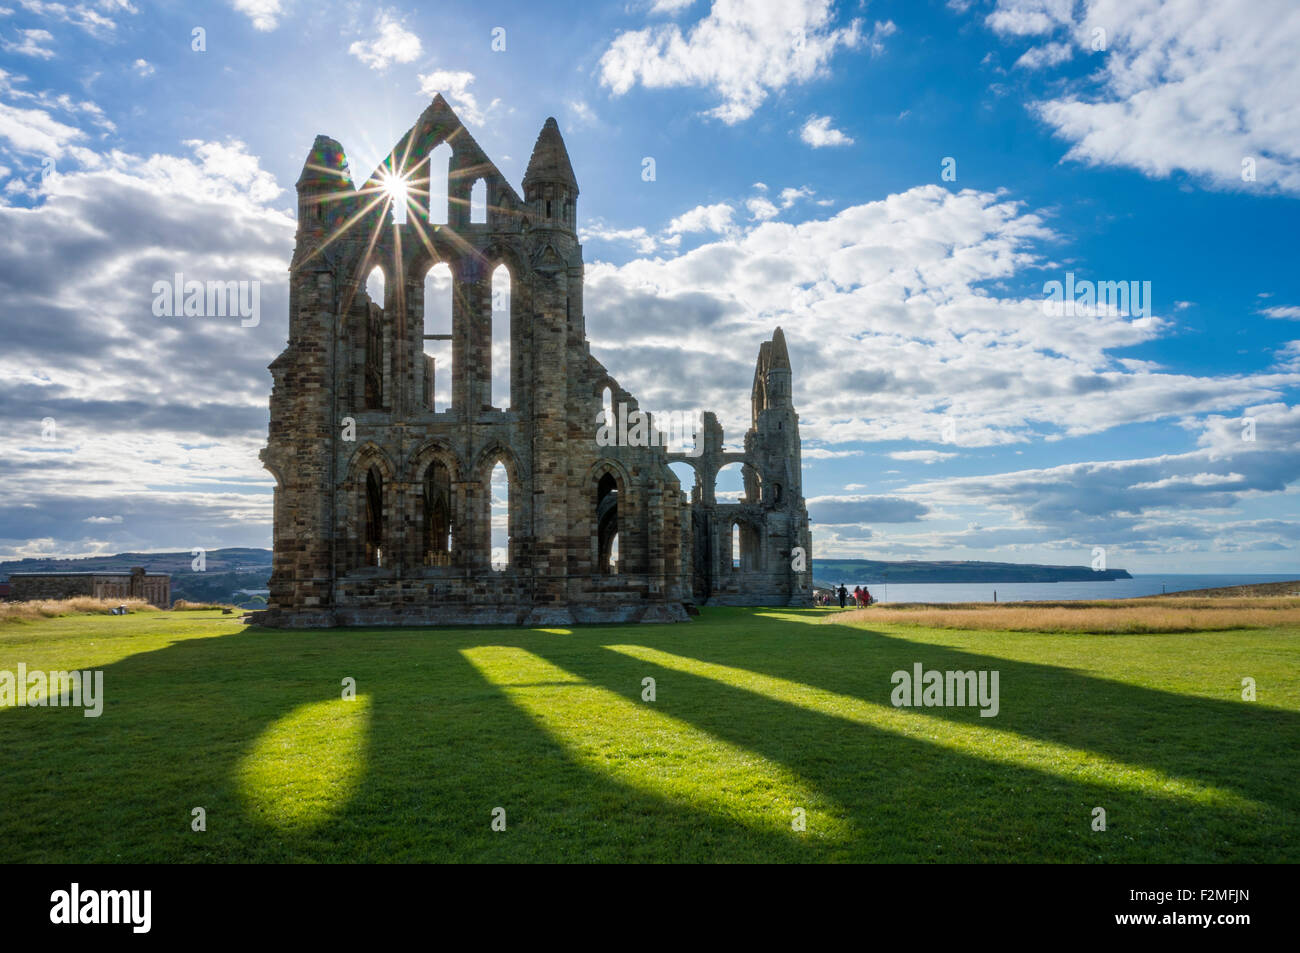 Whitby abbey ruins backlit with shadows Whitby North Yorkshire England Great Britain UK GB Europe Stock Photo